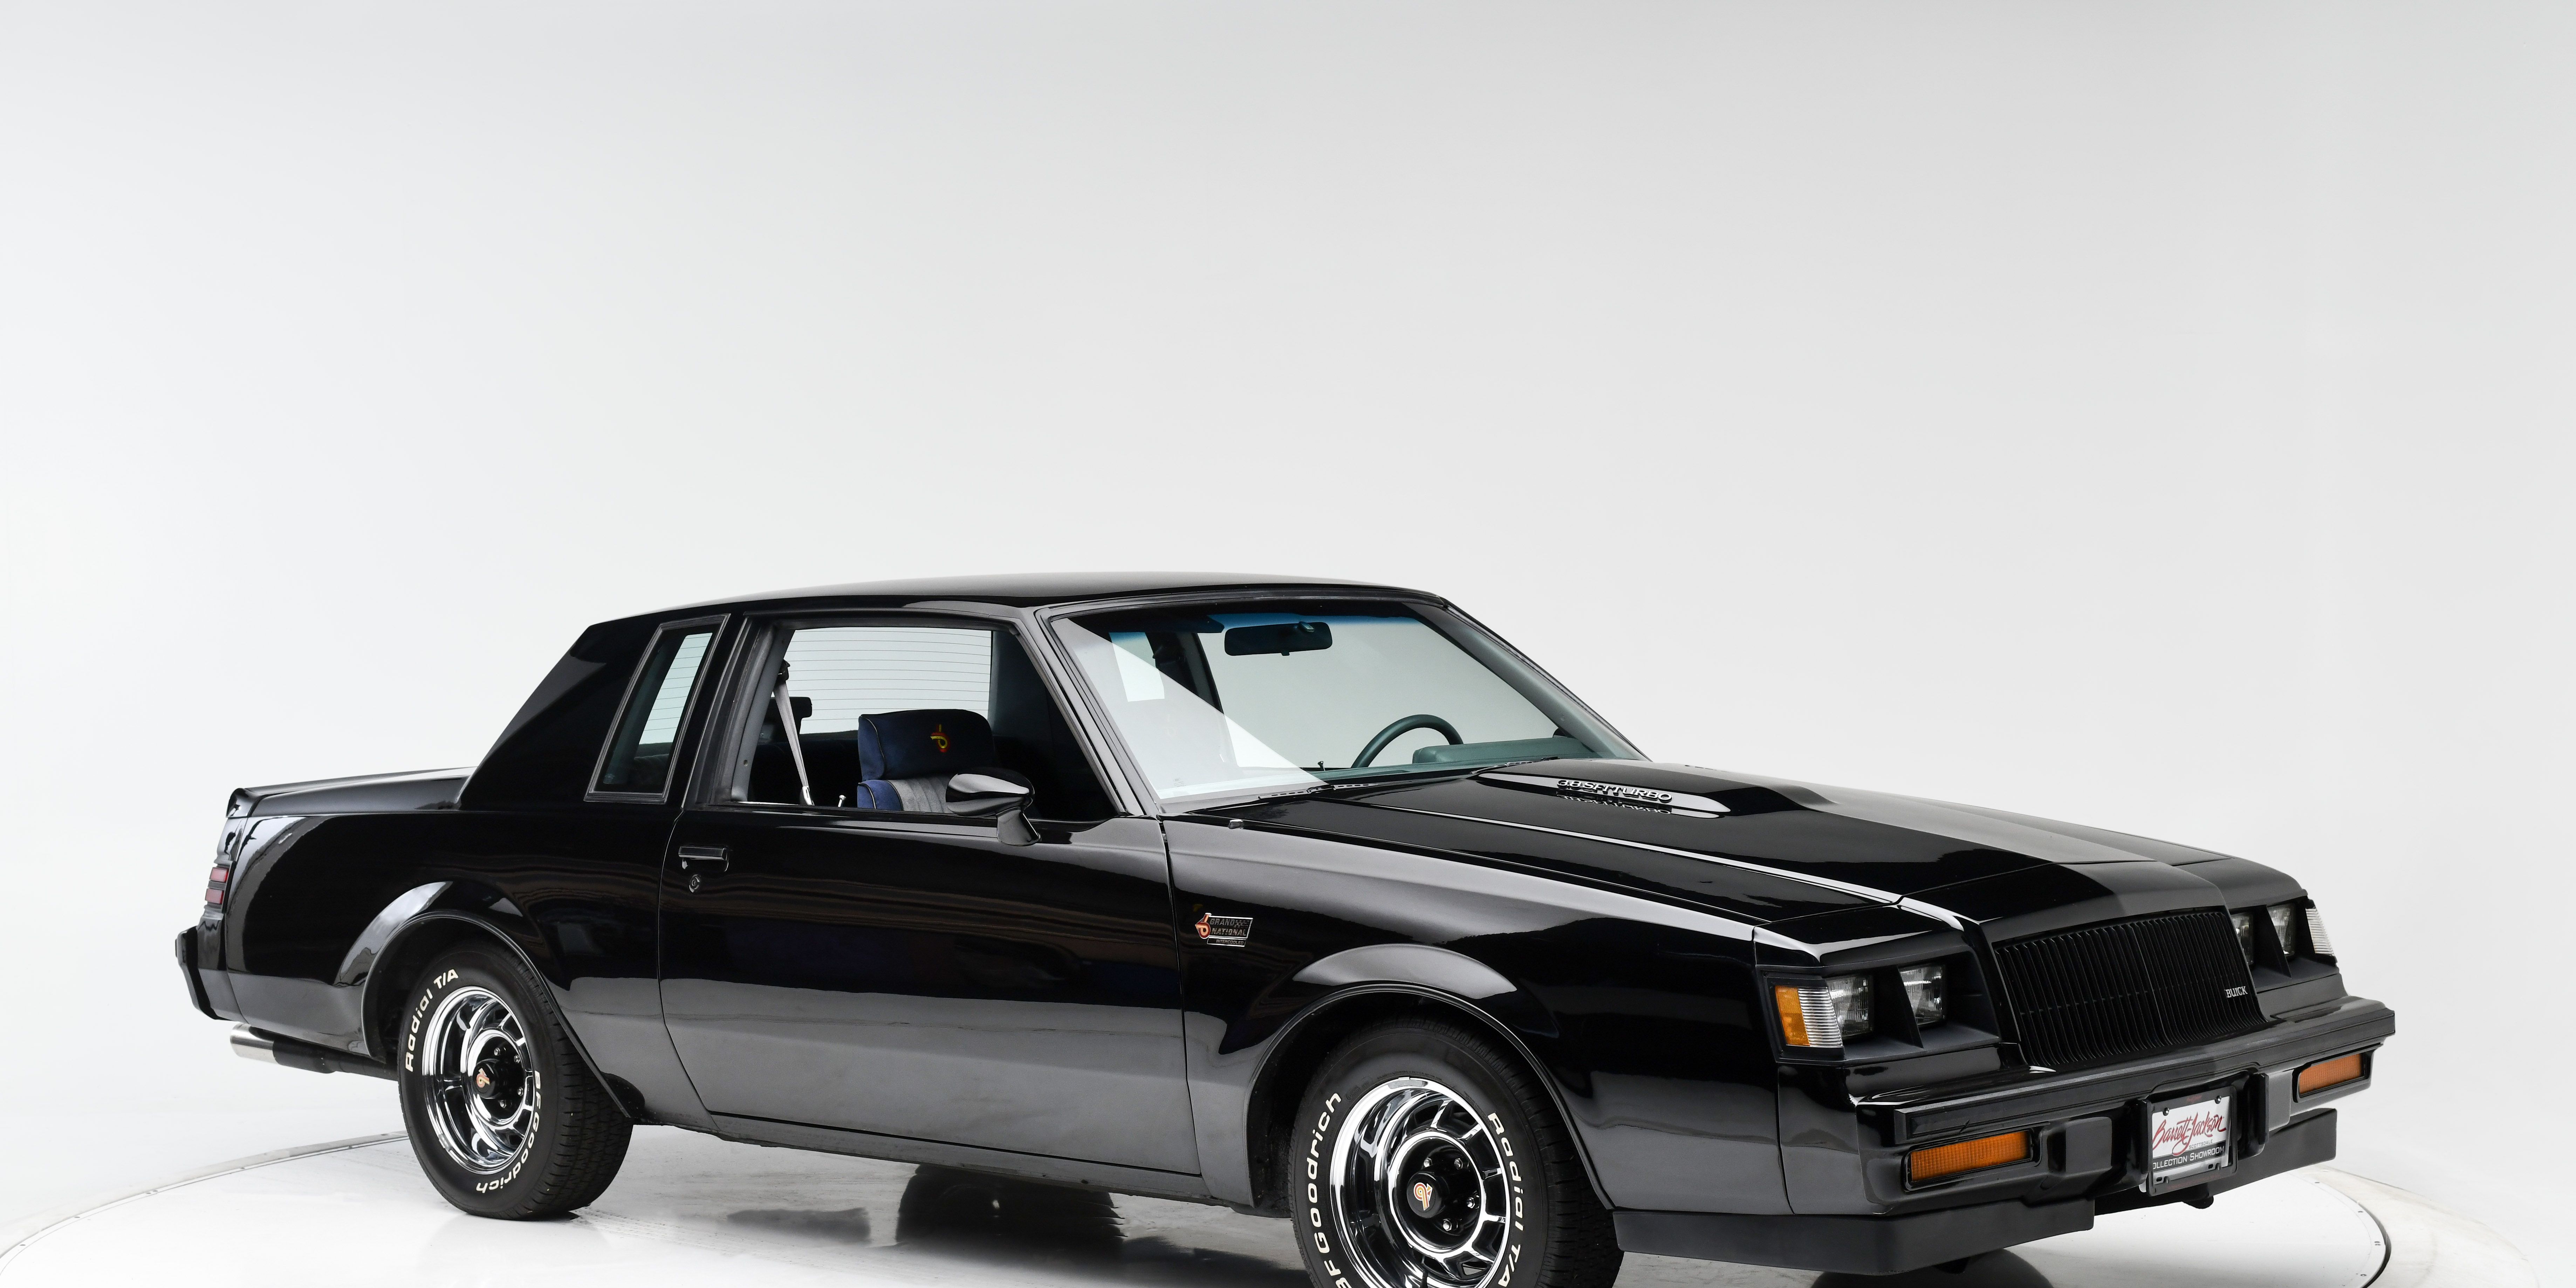 Thief Steals Buick Grand National, Crashes Into Nearly 20 Cars